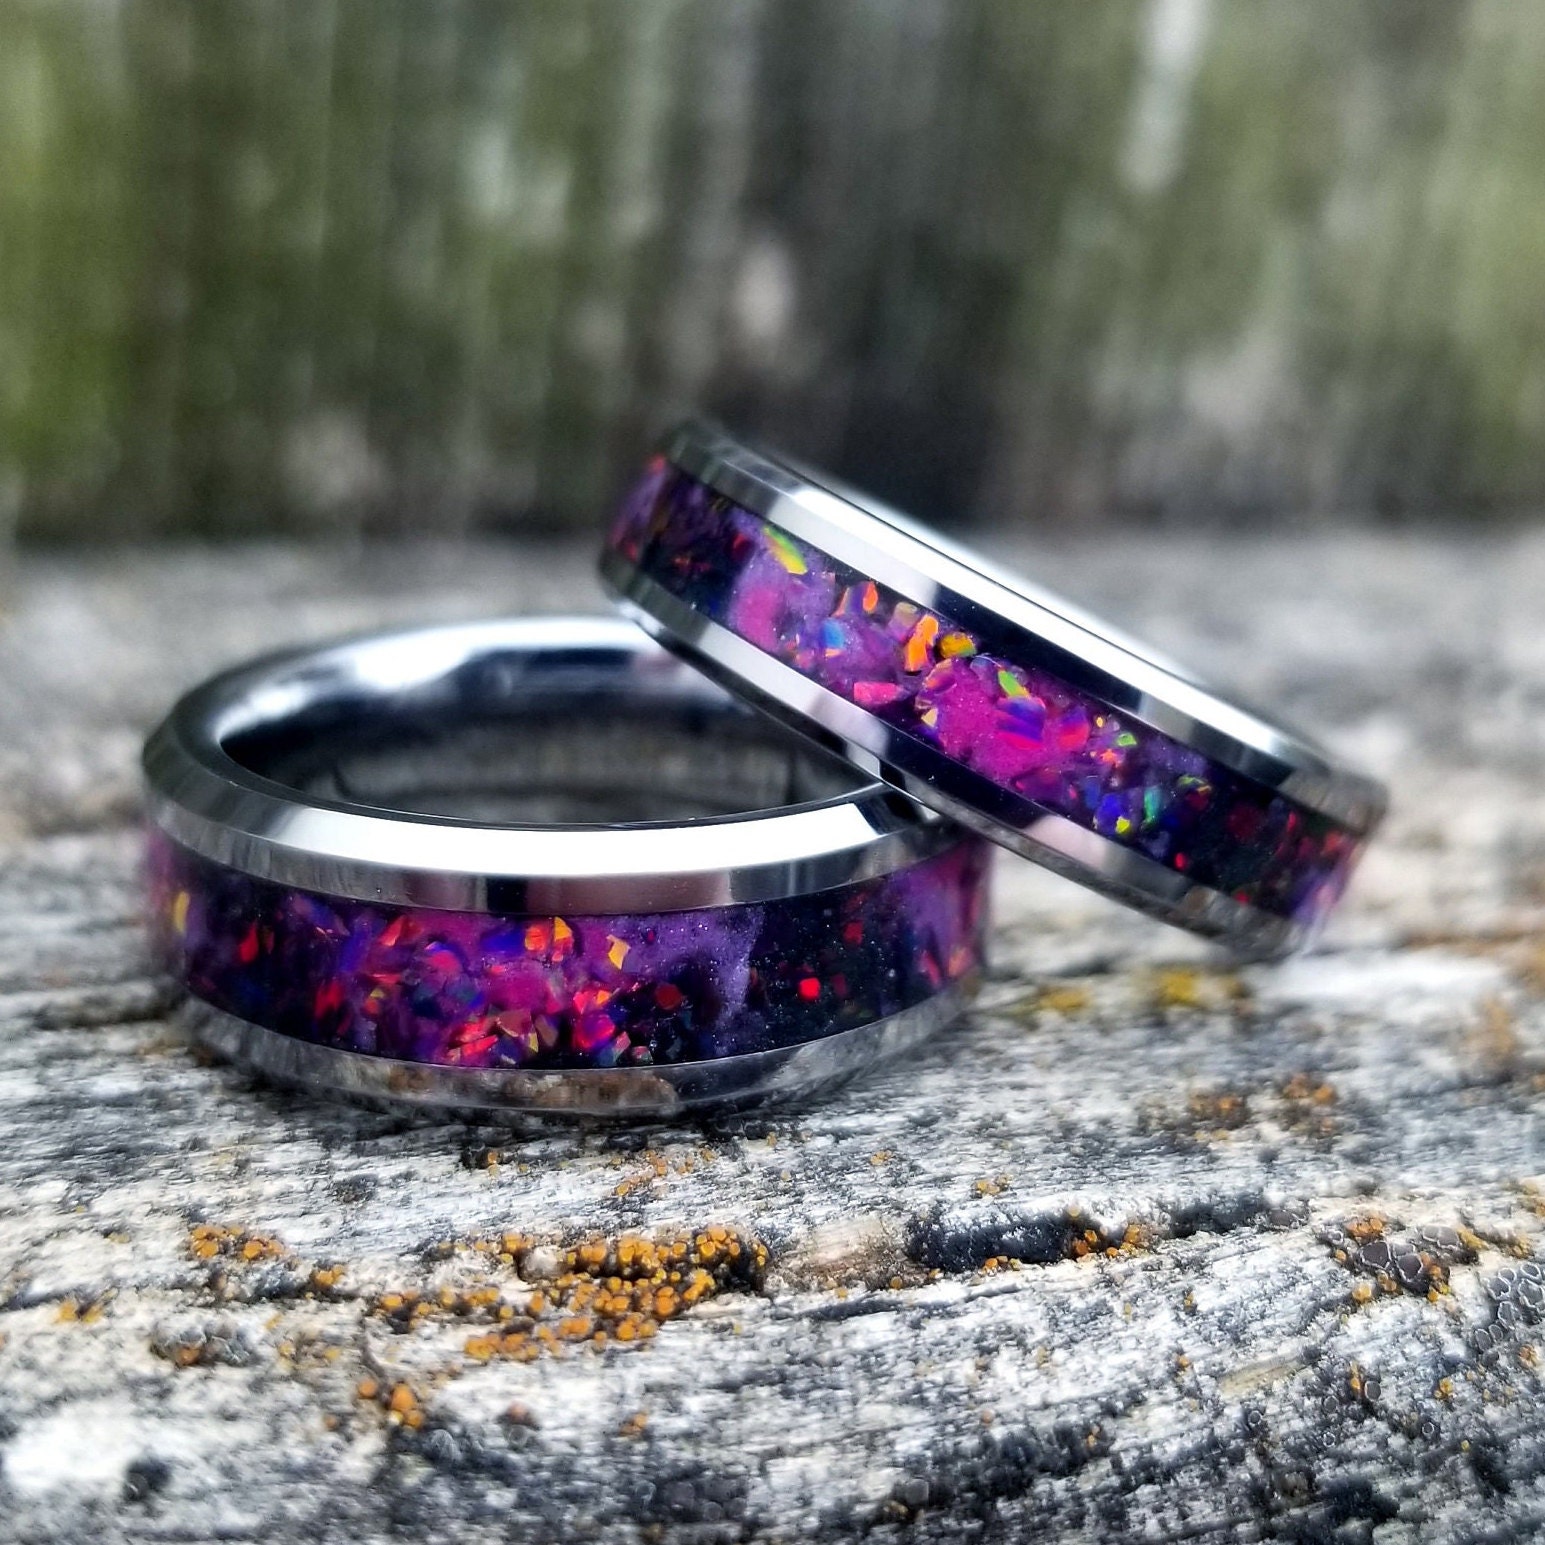 His & Hers Wedding Ring Set - Galaxy Fire Opal Ring - Black Ceramic Glow Ring with Ruby Red & Black Fire Opal Inlay - Sizes 5-13 - Orth Custom Rings